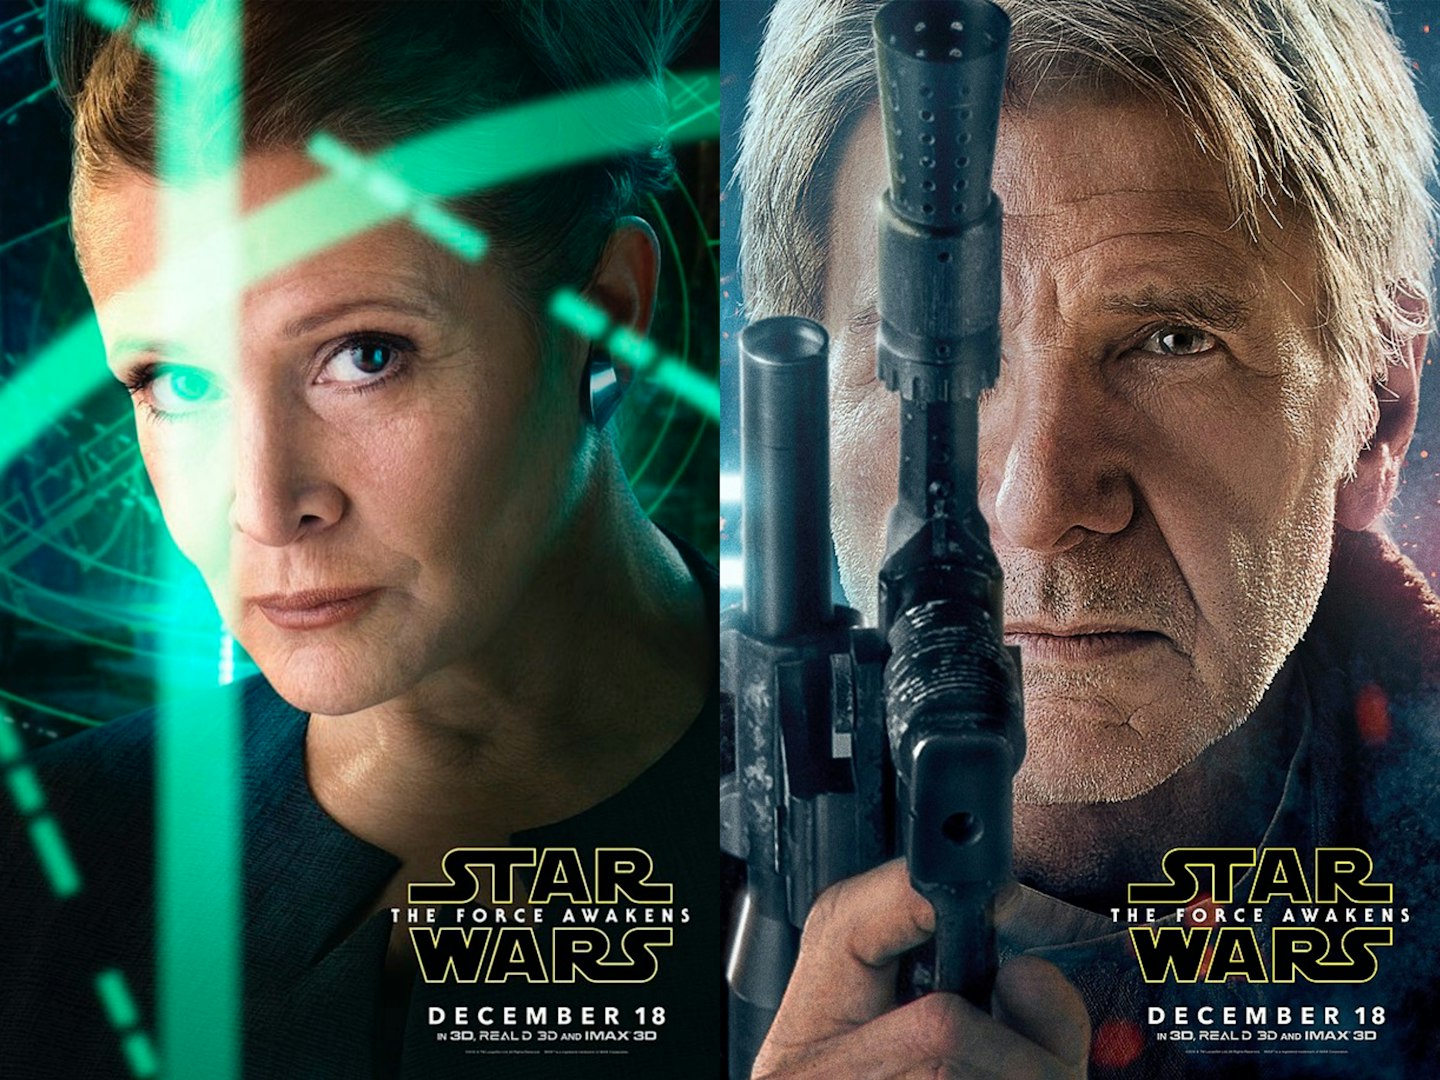 Leia Han Star Wars Character Posters